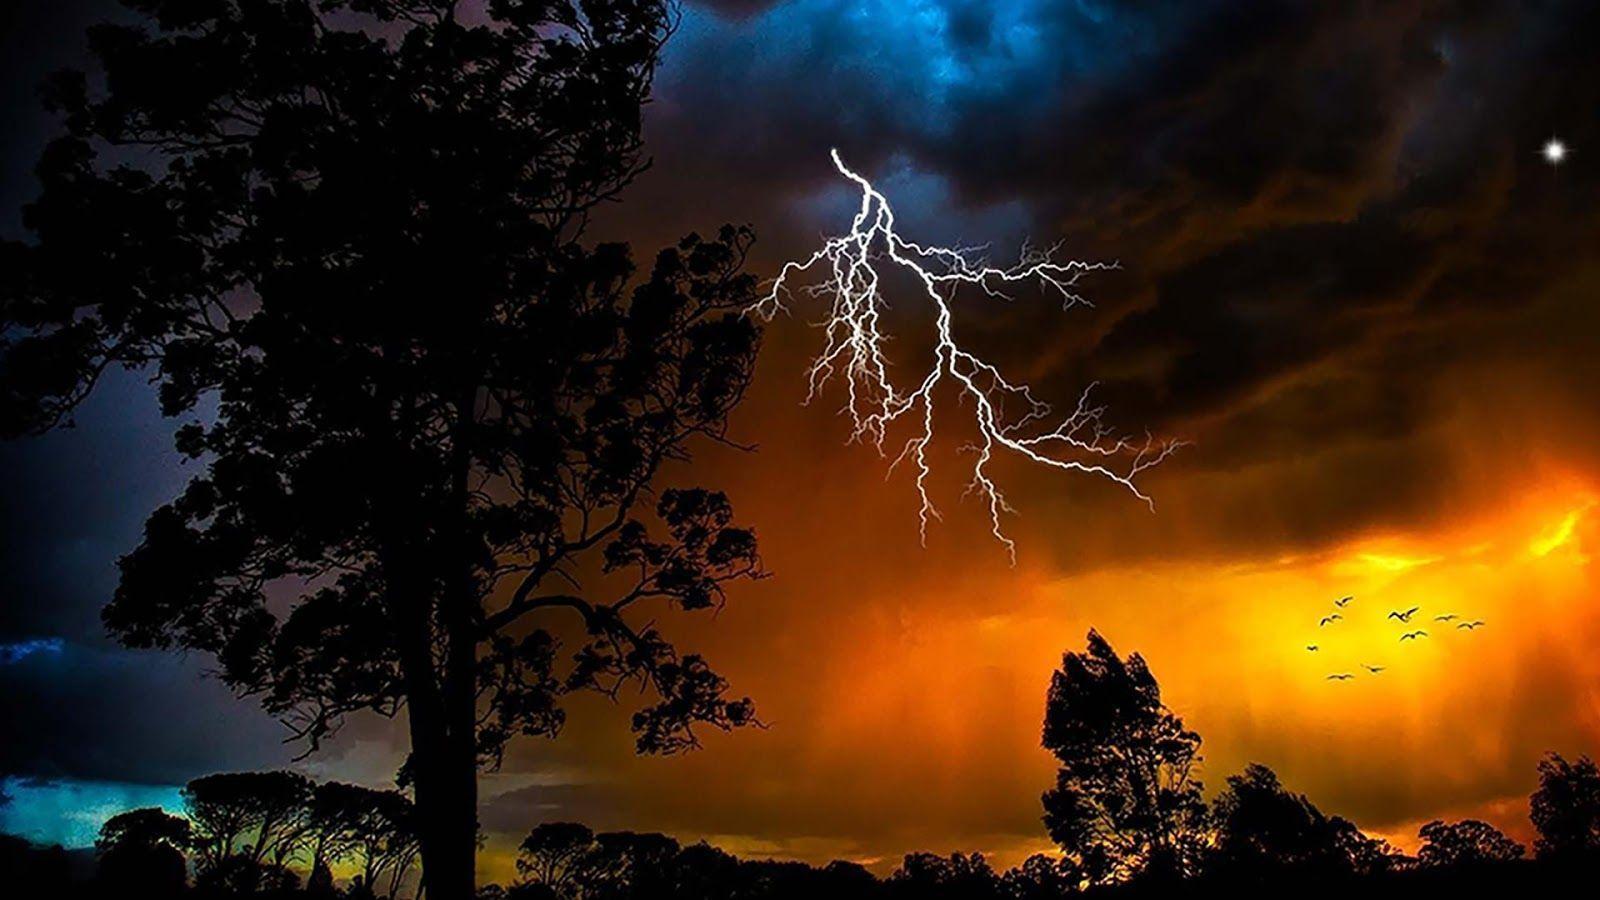 Thunderstorm Live Wallpaper Apps on Google Play